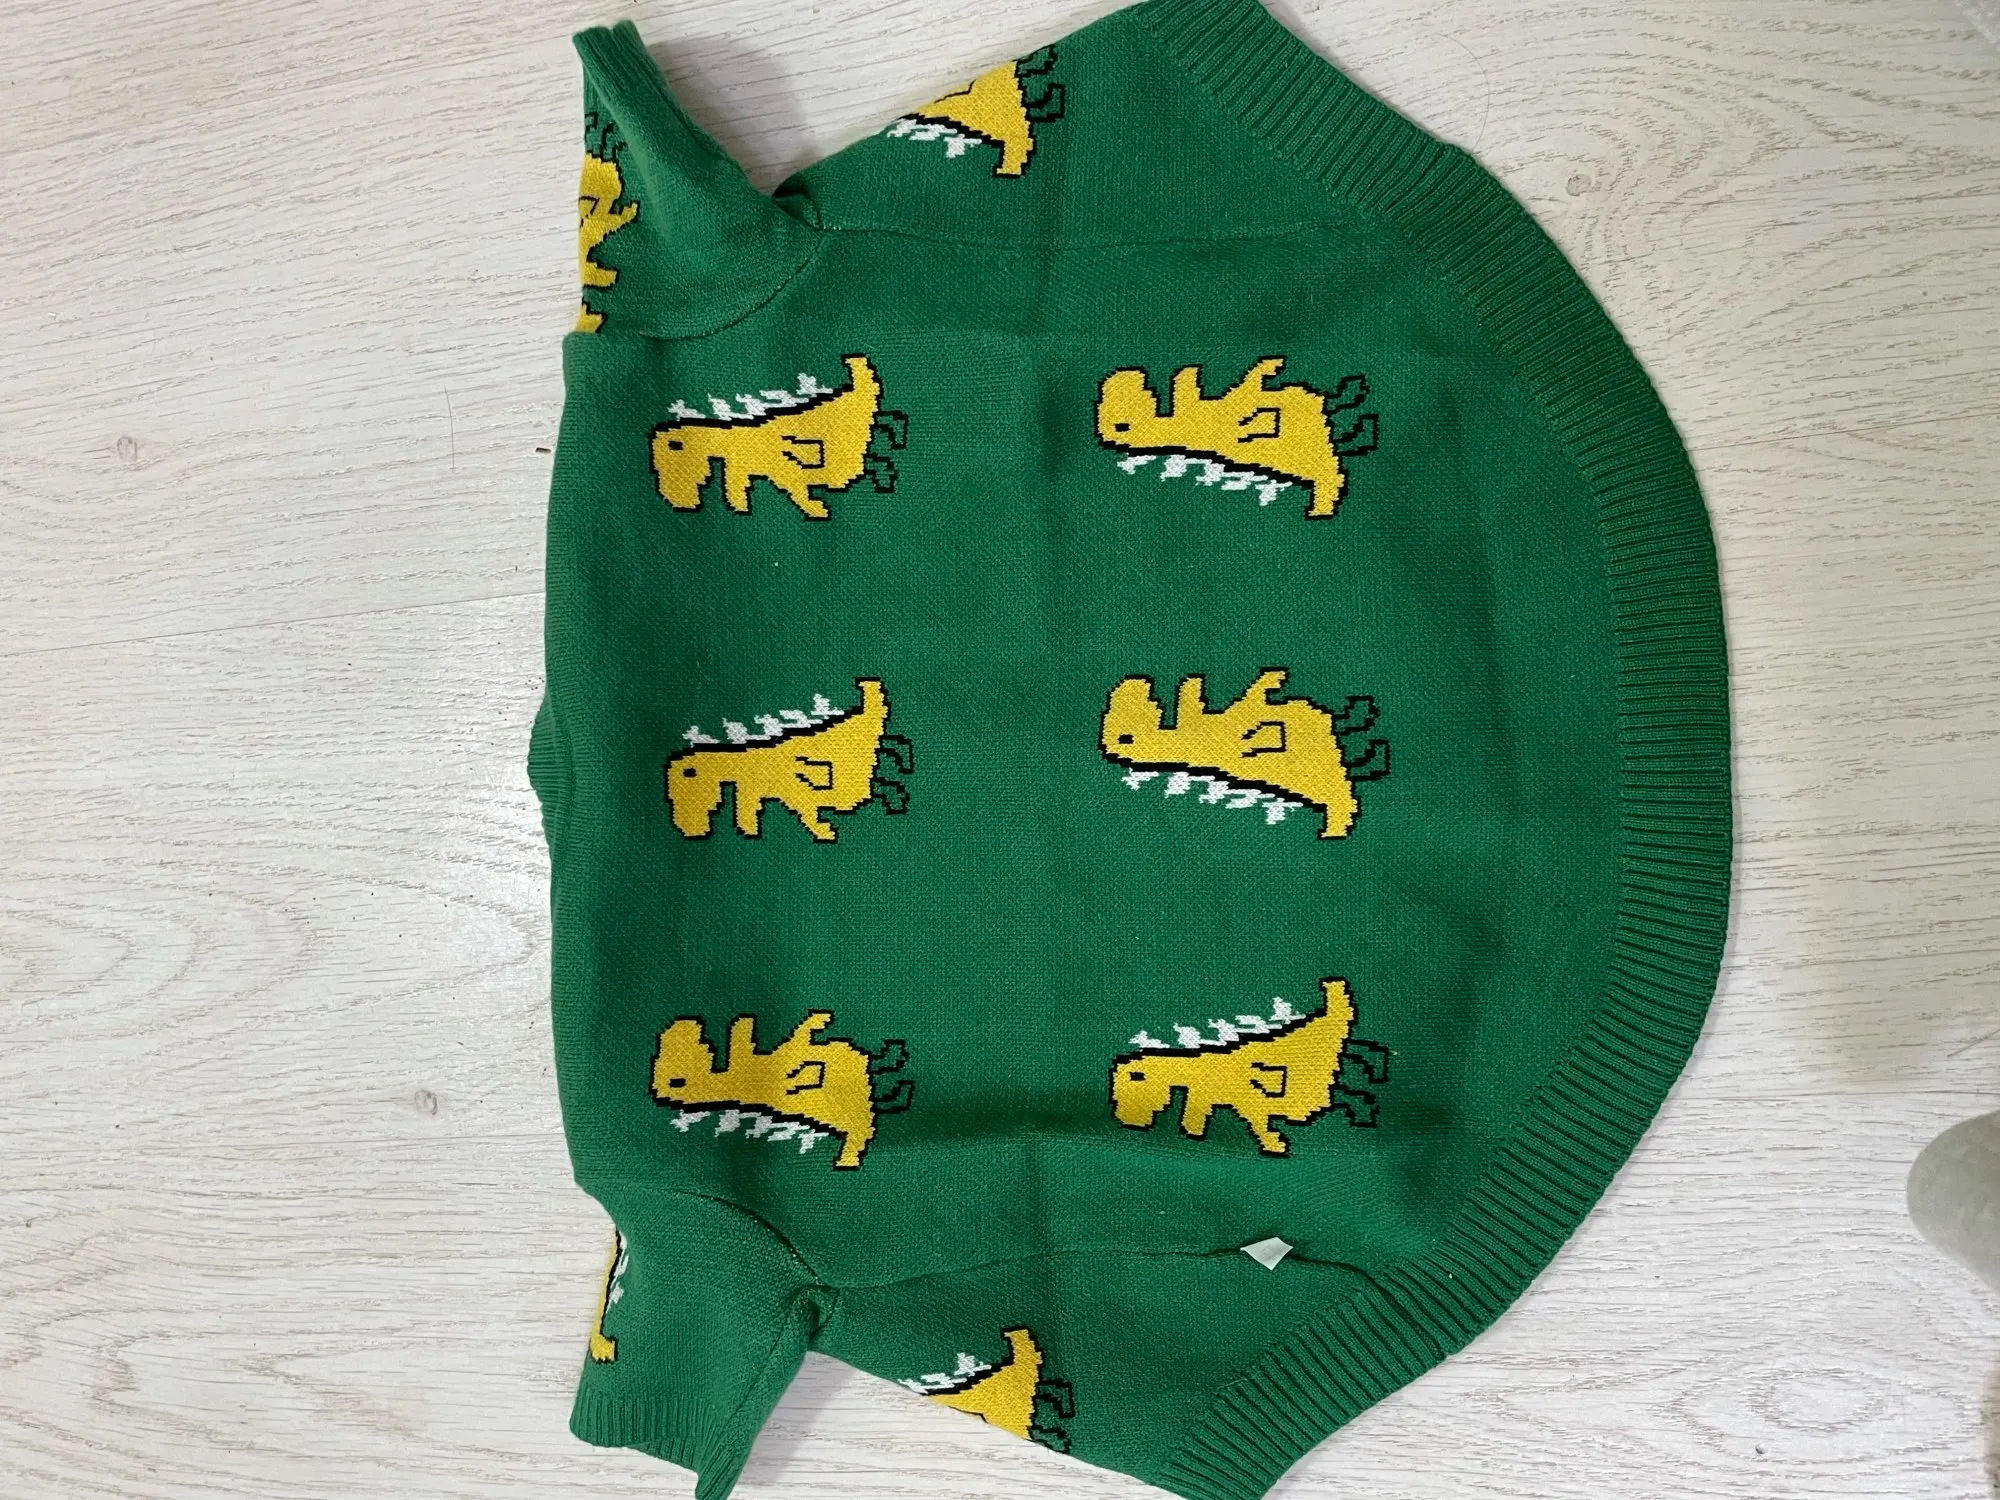 Green Cardigan With Dinosaur Pattern - Fashion Trends For Dogs photo review